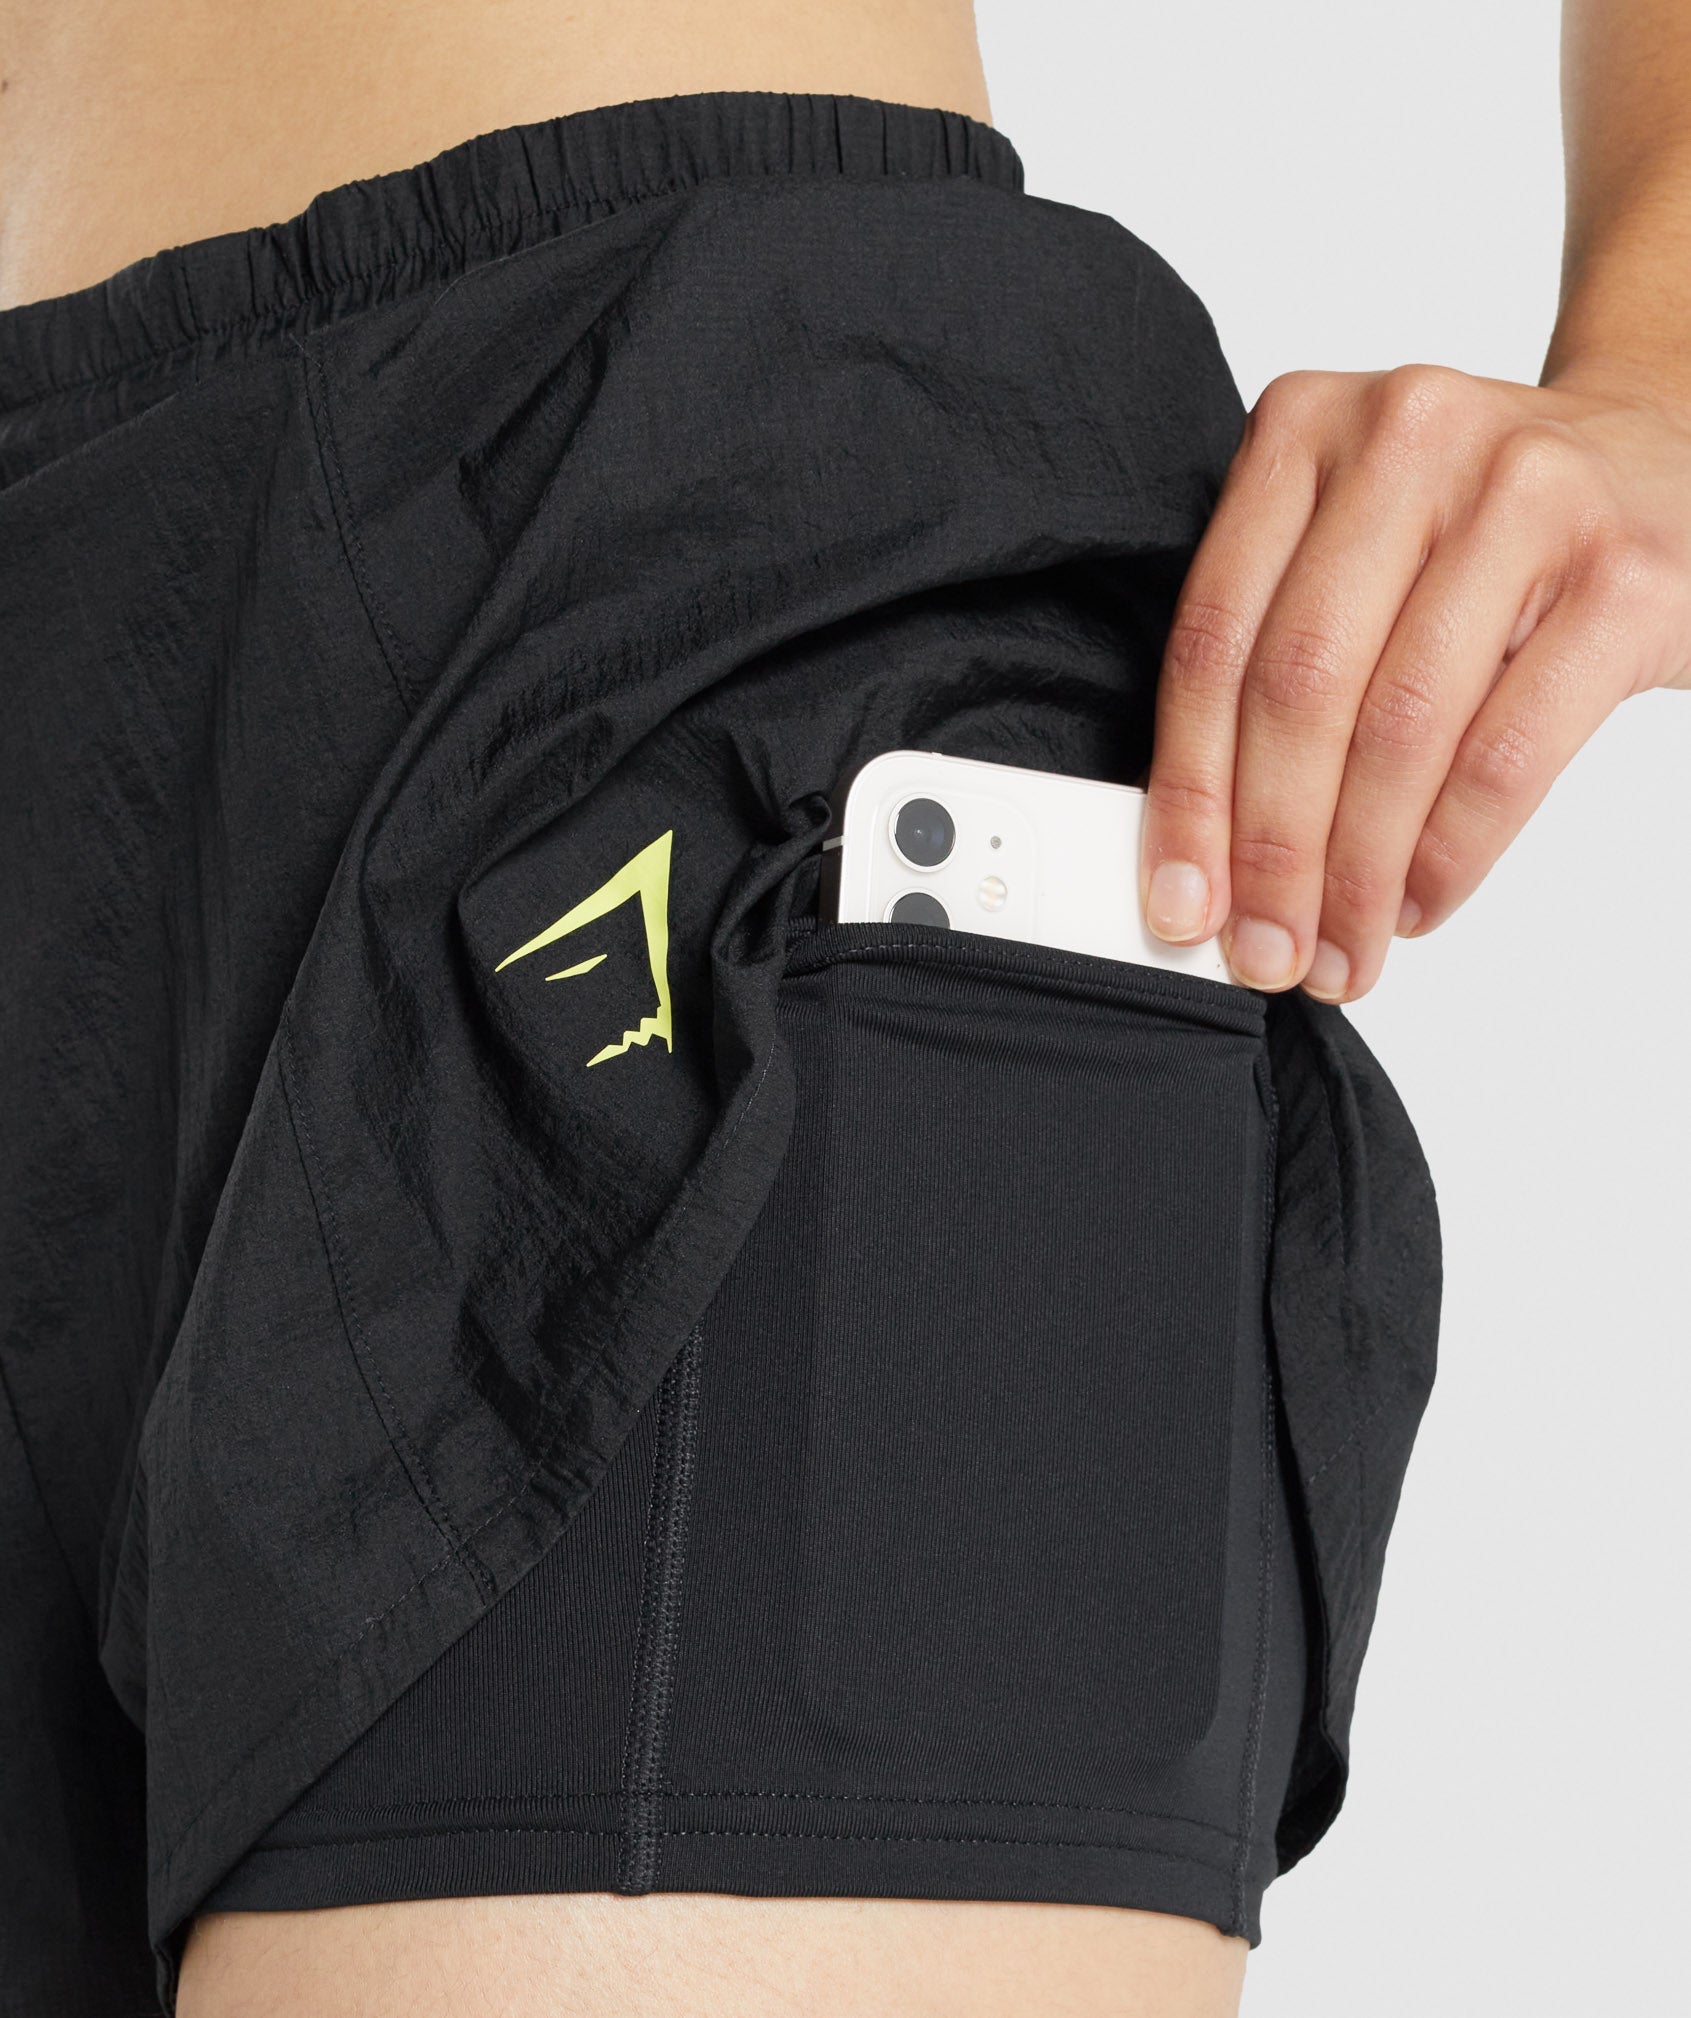 Pulse 2 in 1 Shorts in Black - view 6